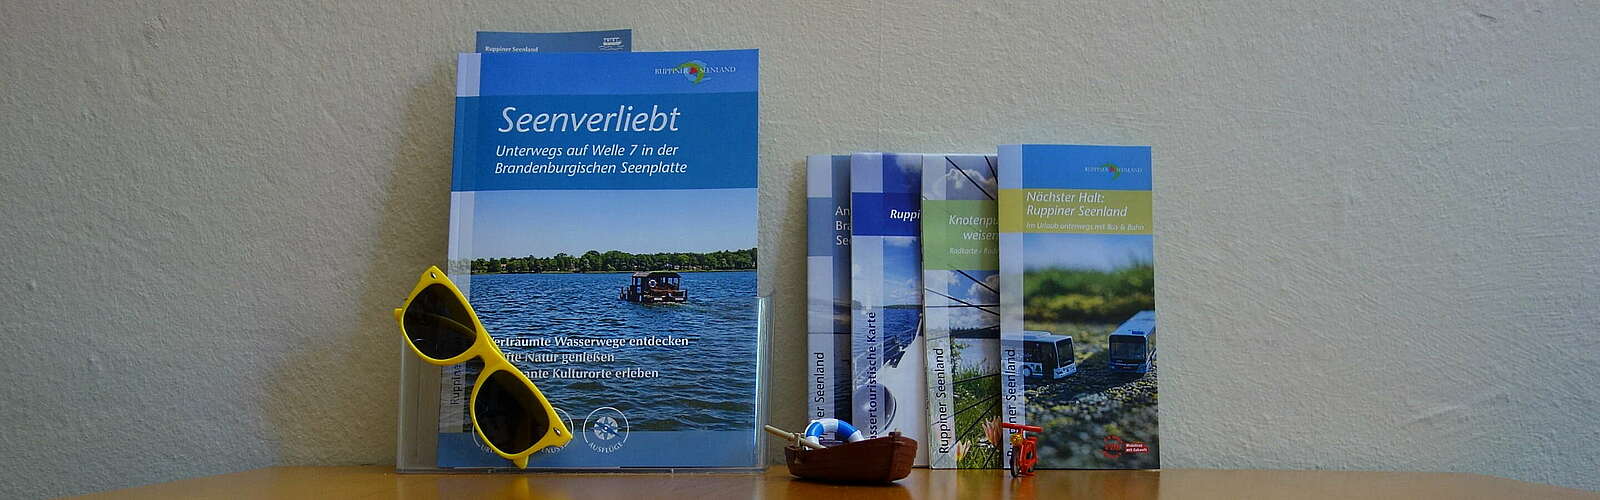 Travel magazine and brochures,
        
    

        Picture: Tourismusverband Ruppiner Seenland e.V./Andrea Krumnow